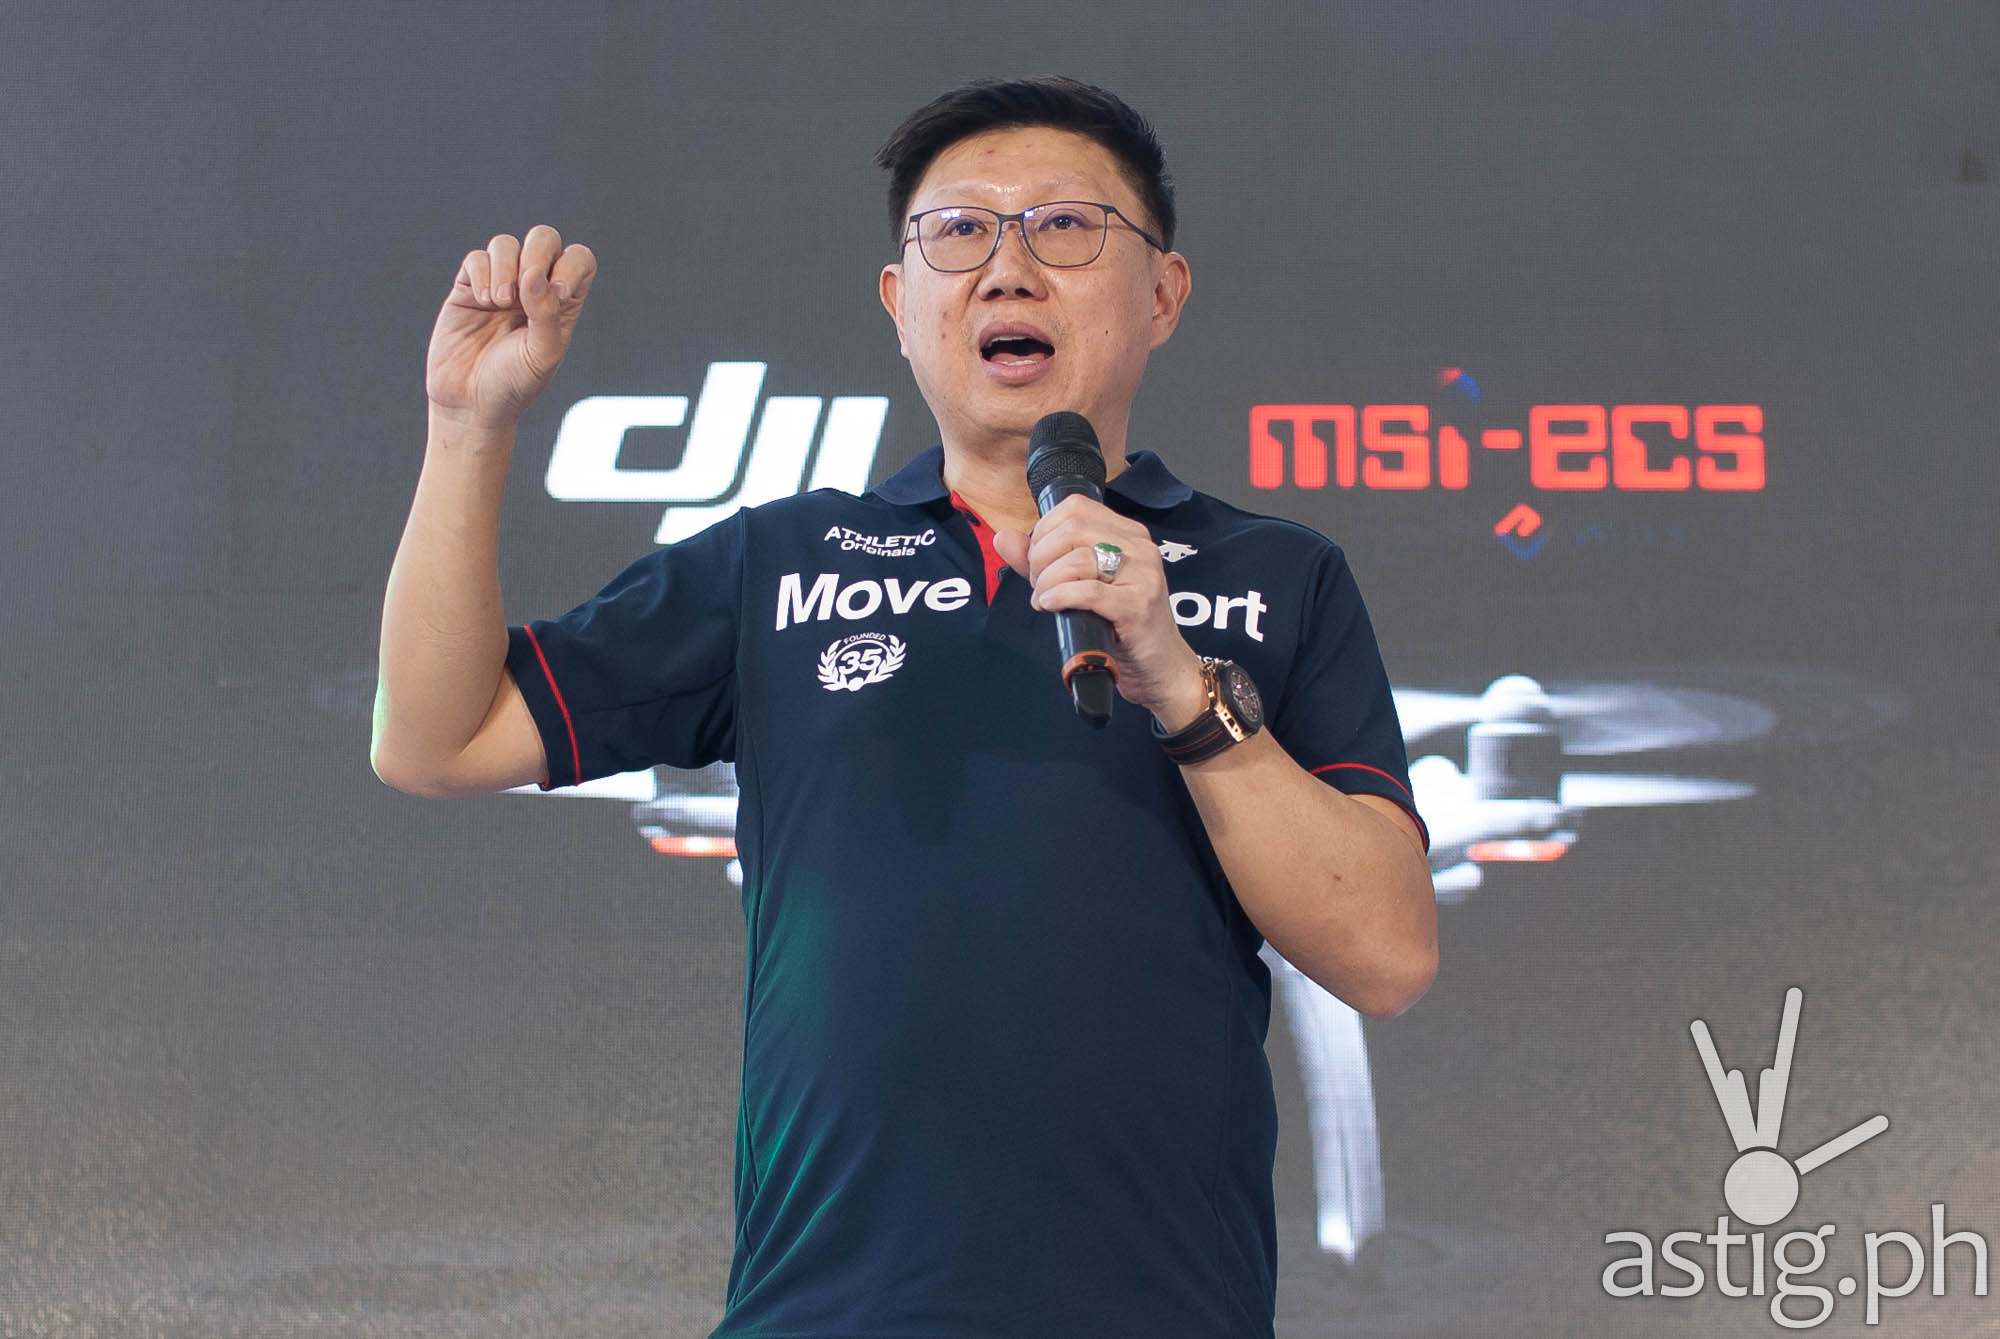 Jimmy Go, president and CEO, MSI-ECS Philippines